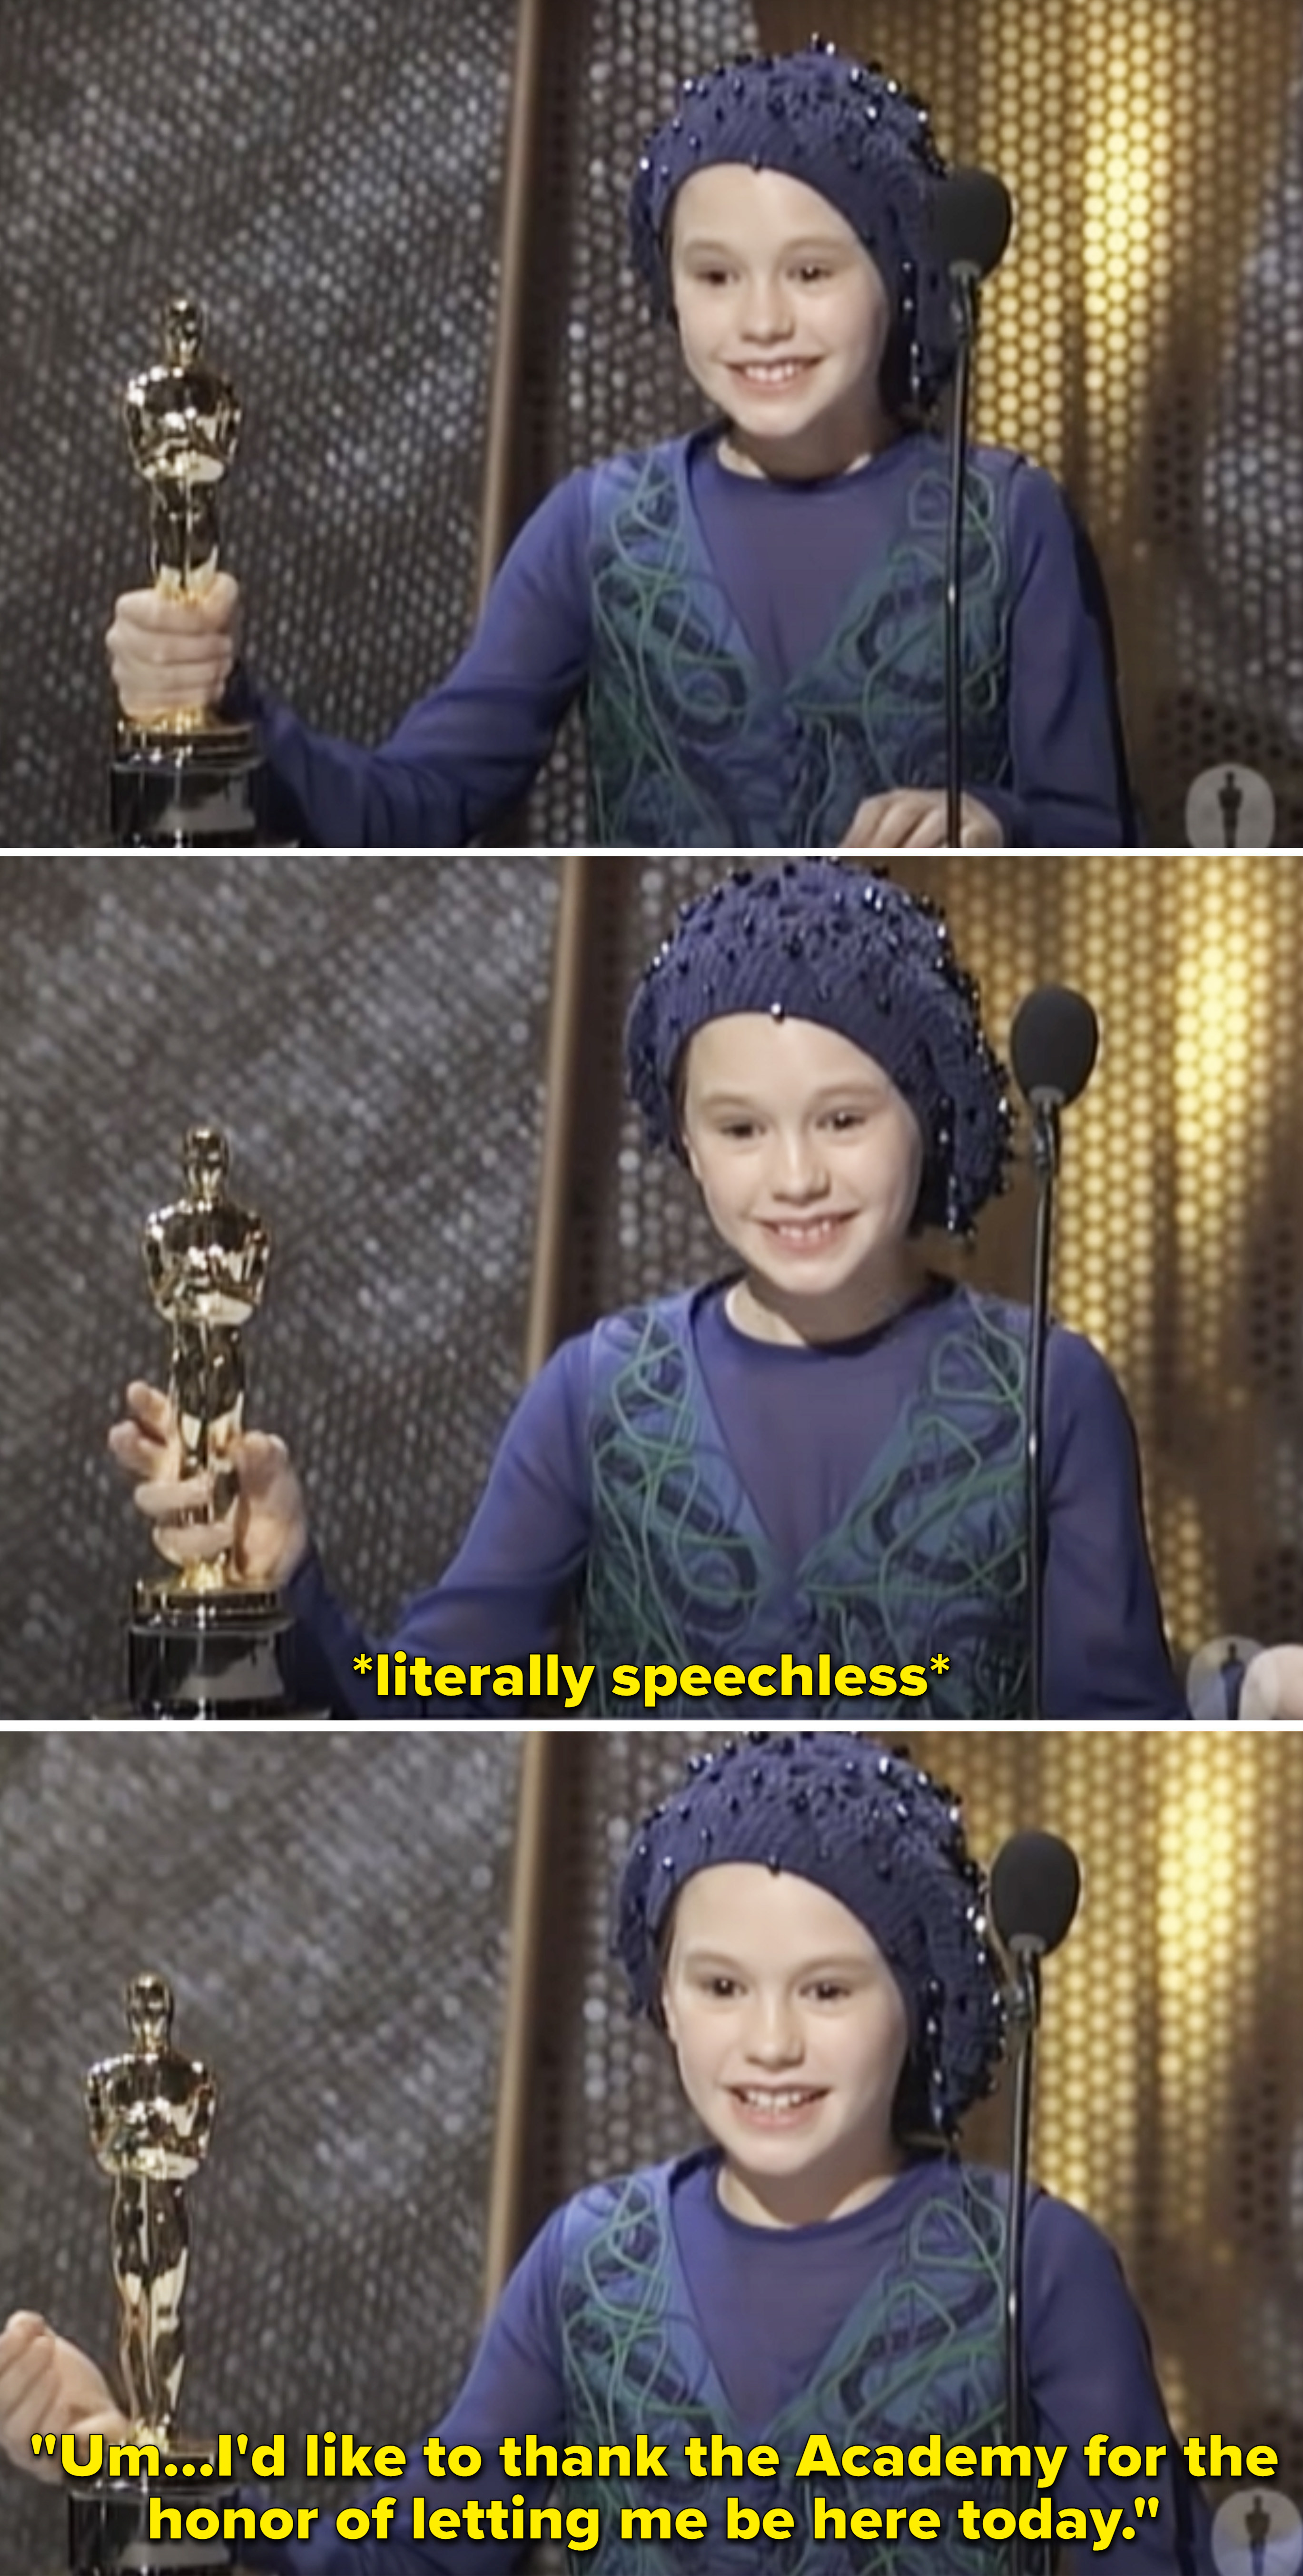 Anna literally speechless and smiling while accepting her award